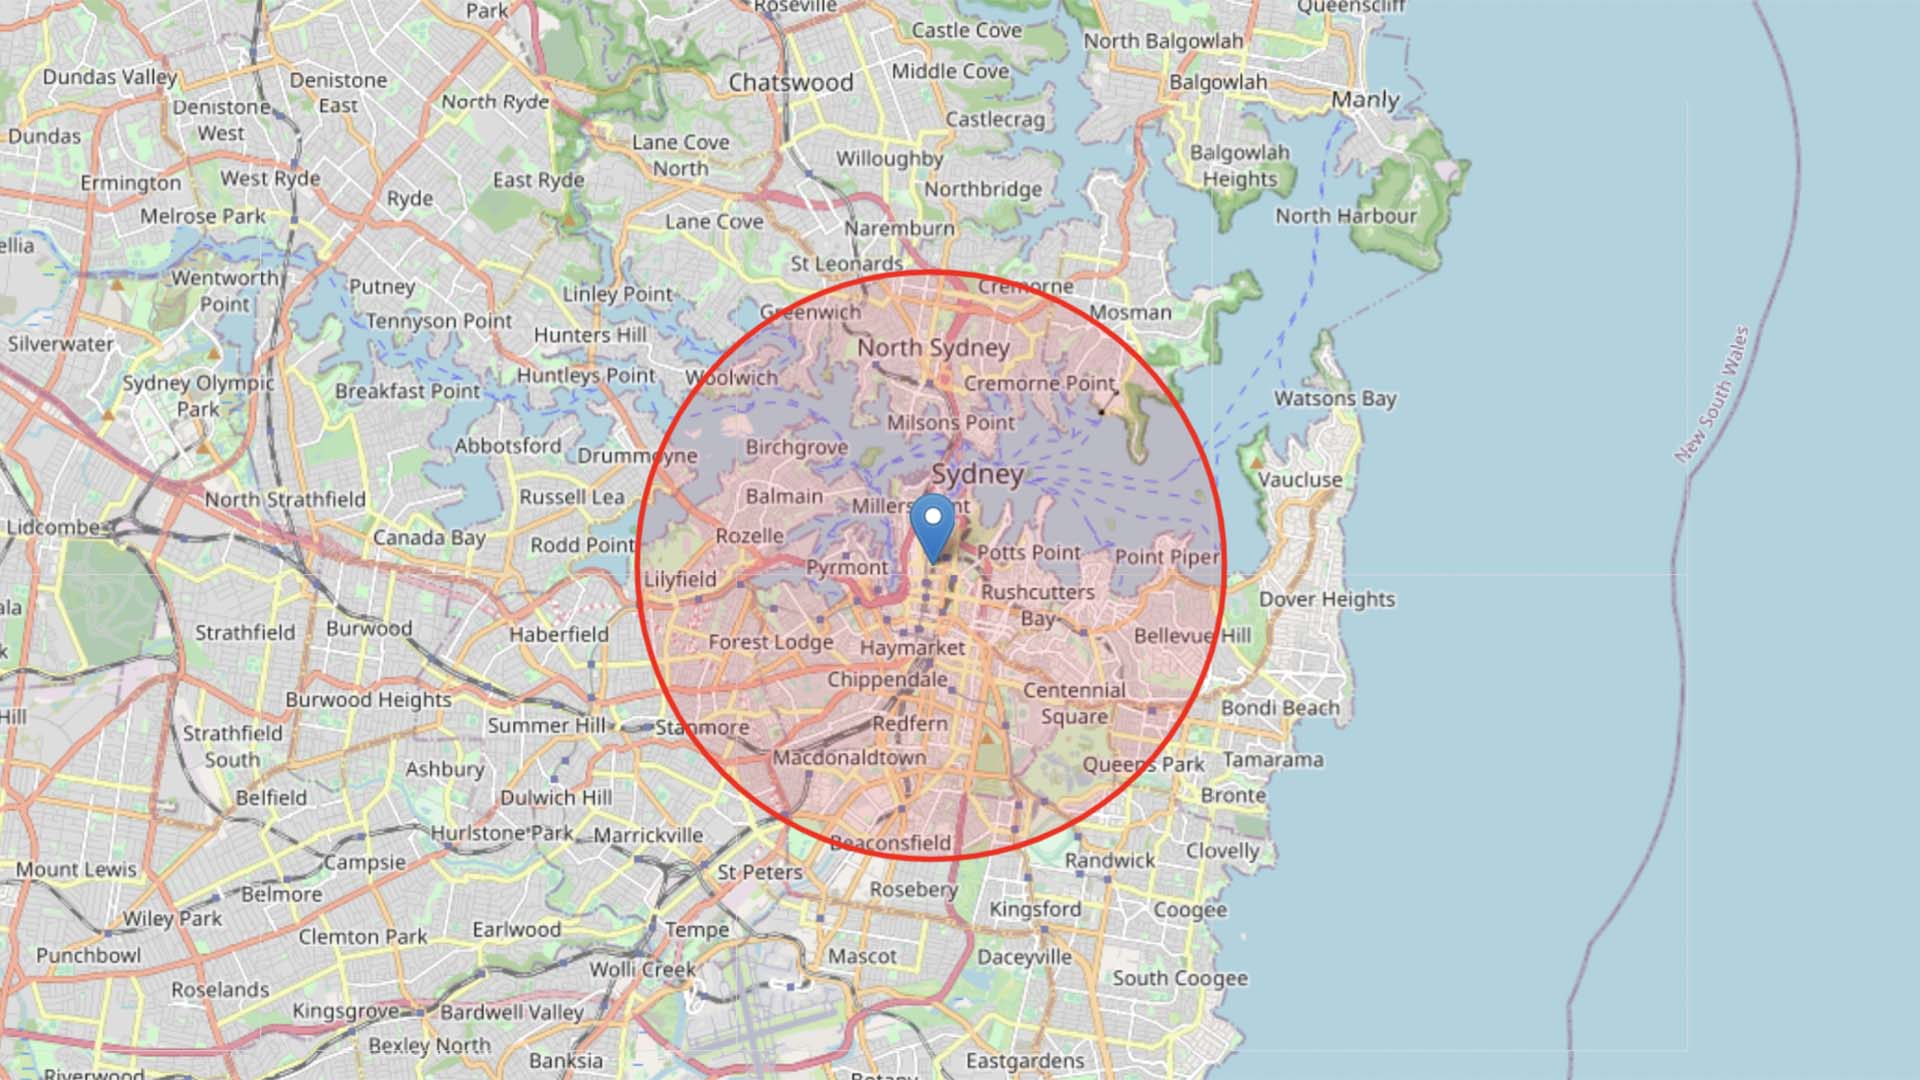 Here's How to Measure What's Five Kilometres From Your Home During Sydney's Lockdown